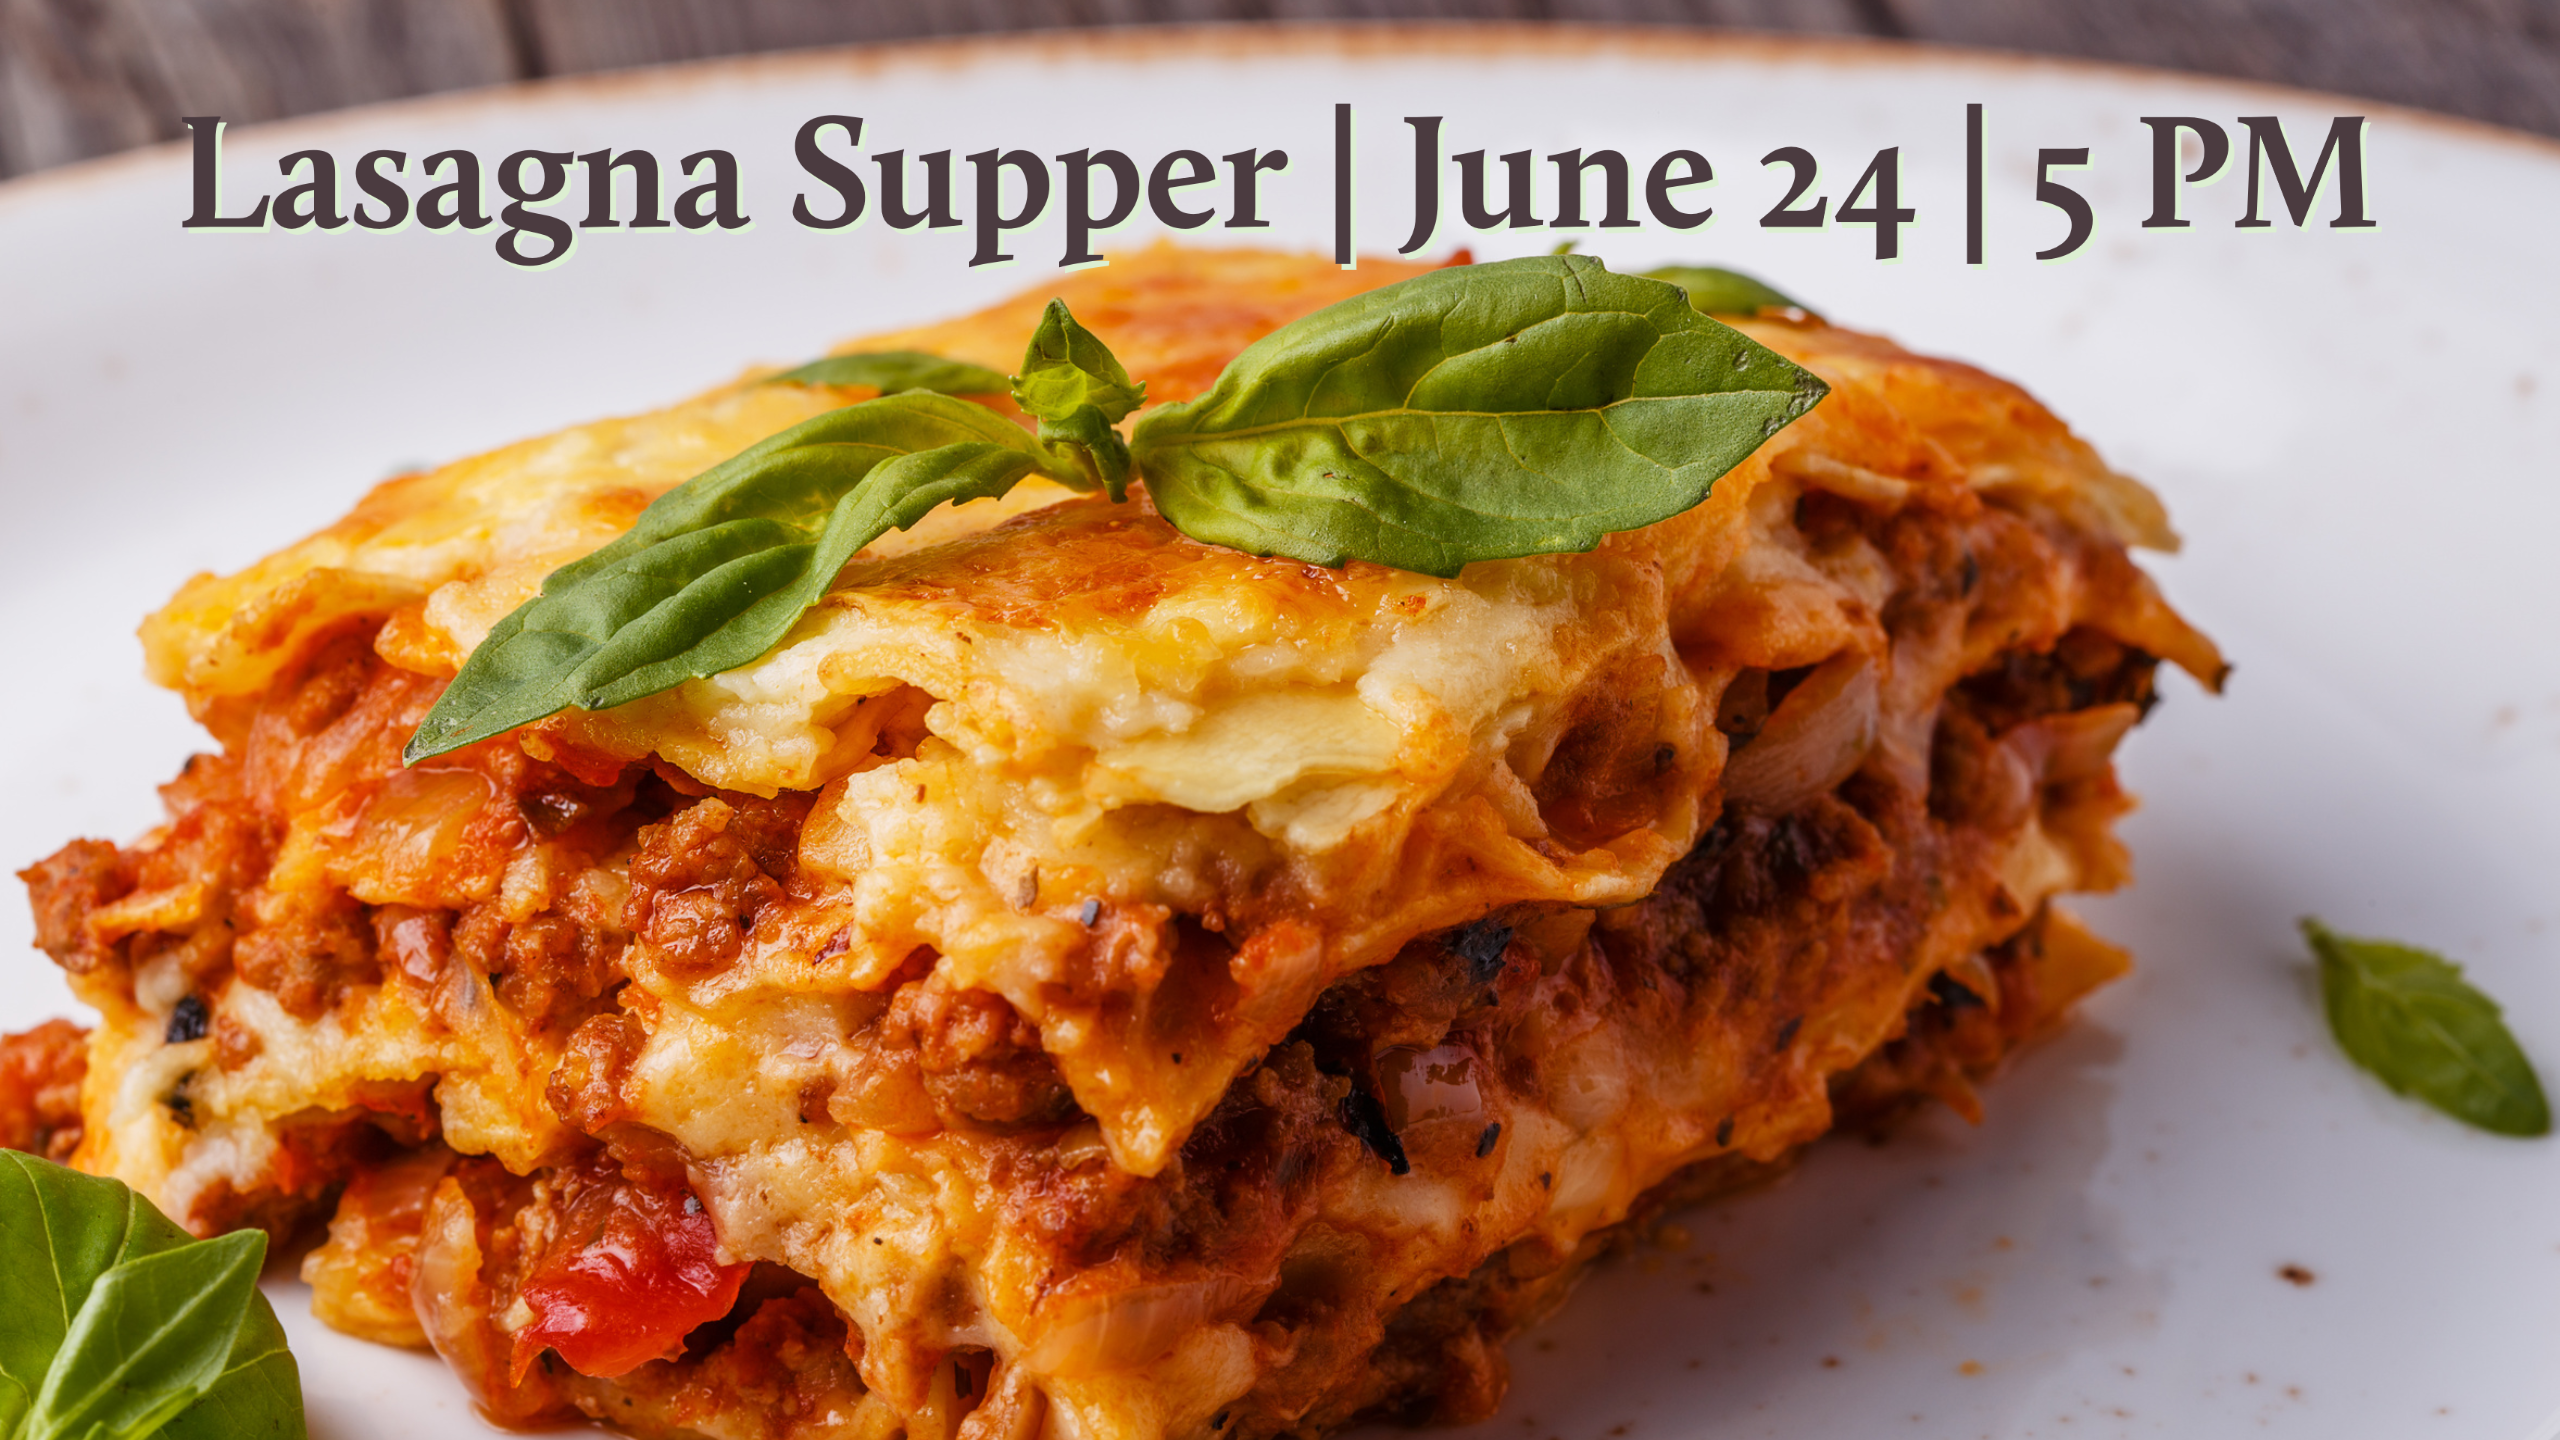 a slice of lasagna on a plate with the text "Lasagna Supper | June 24 | 5 PM"